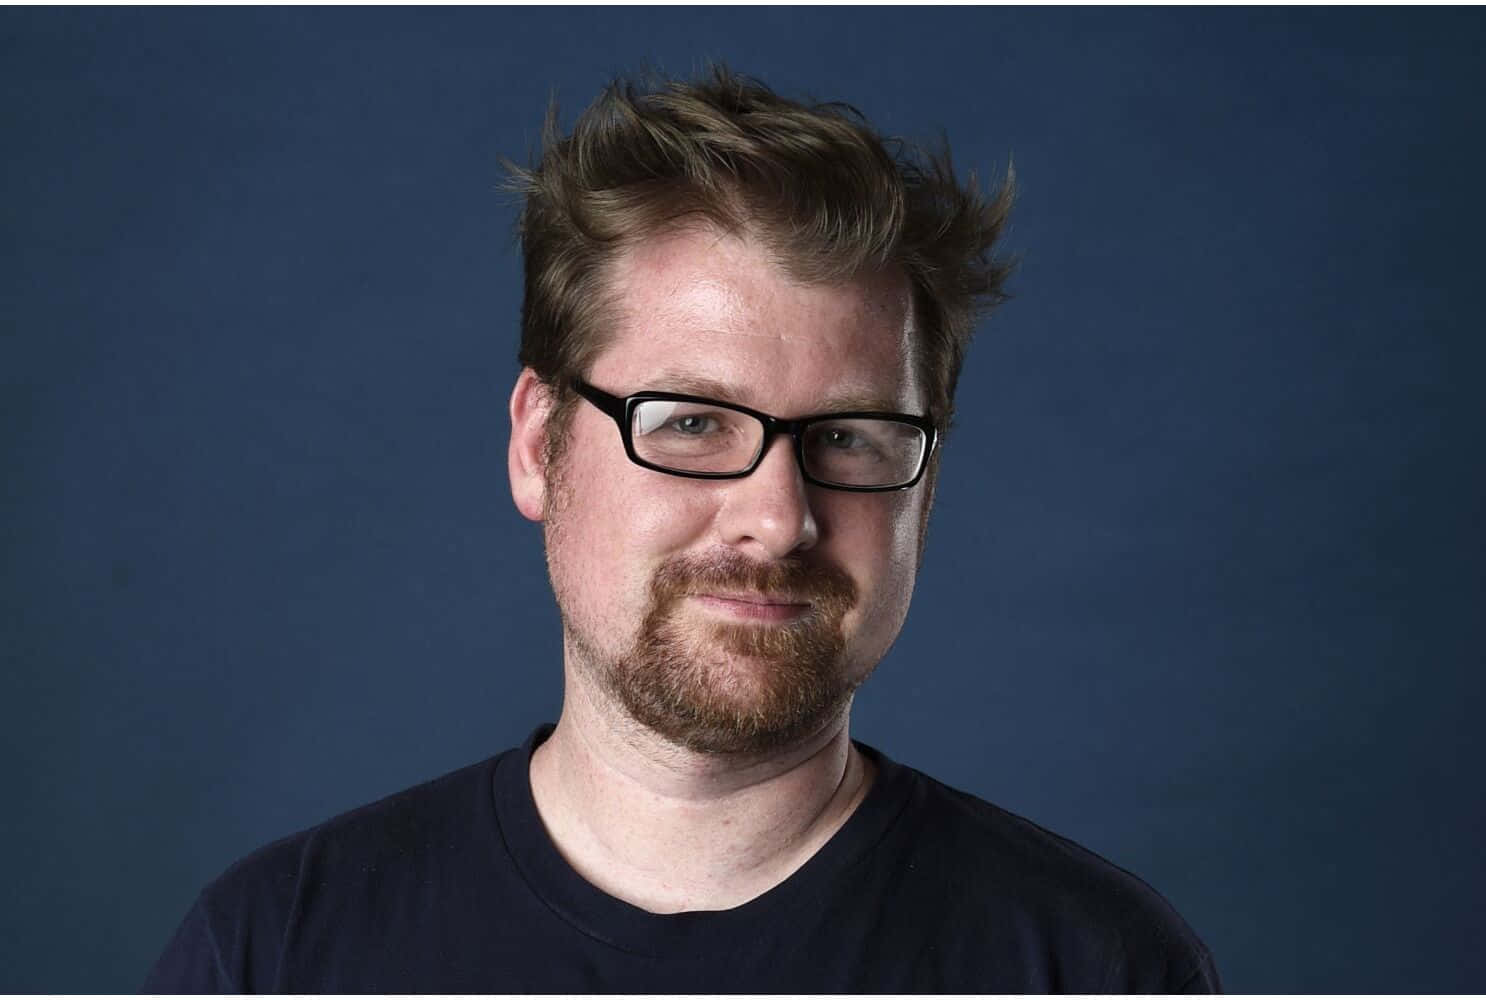 Justin Roiland, Co-Creator of Rick and Morty, at an event Wallpaper